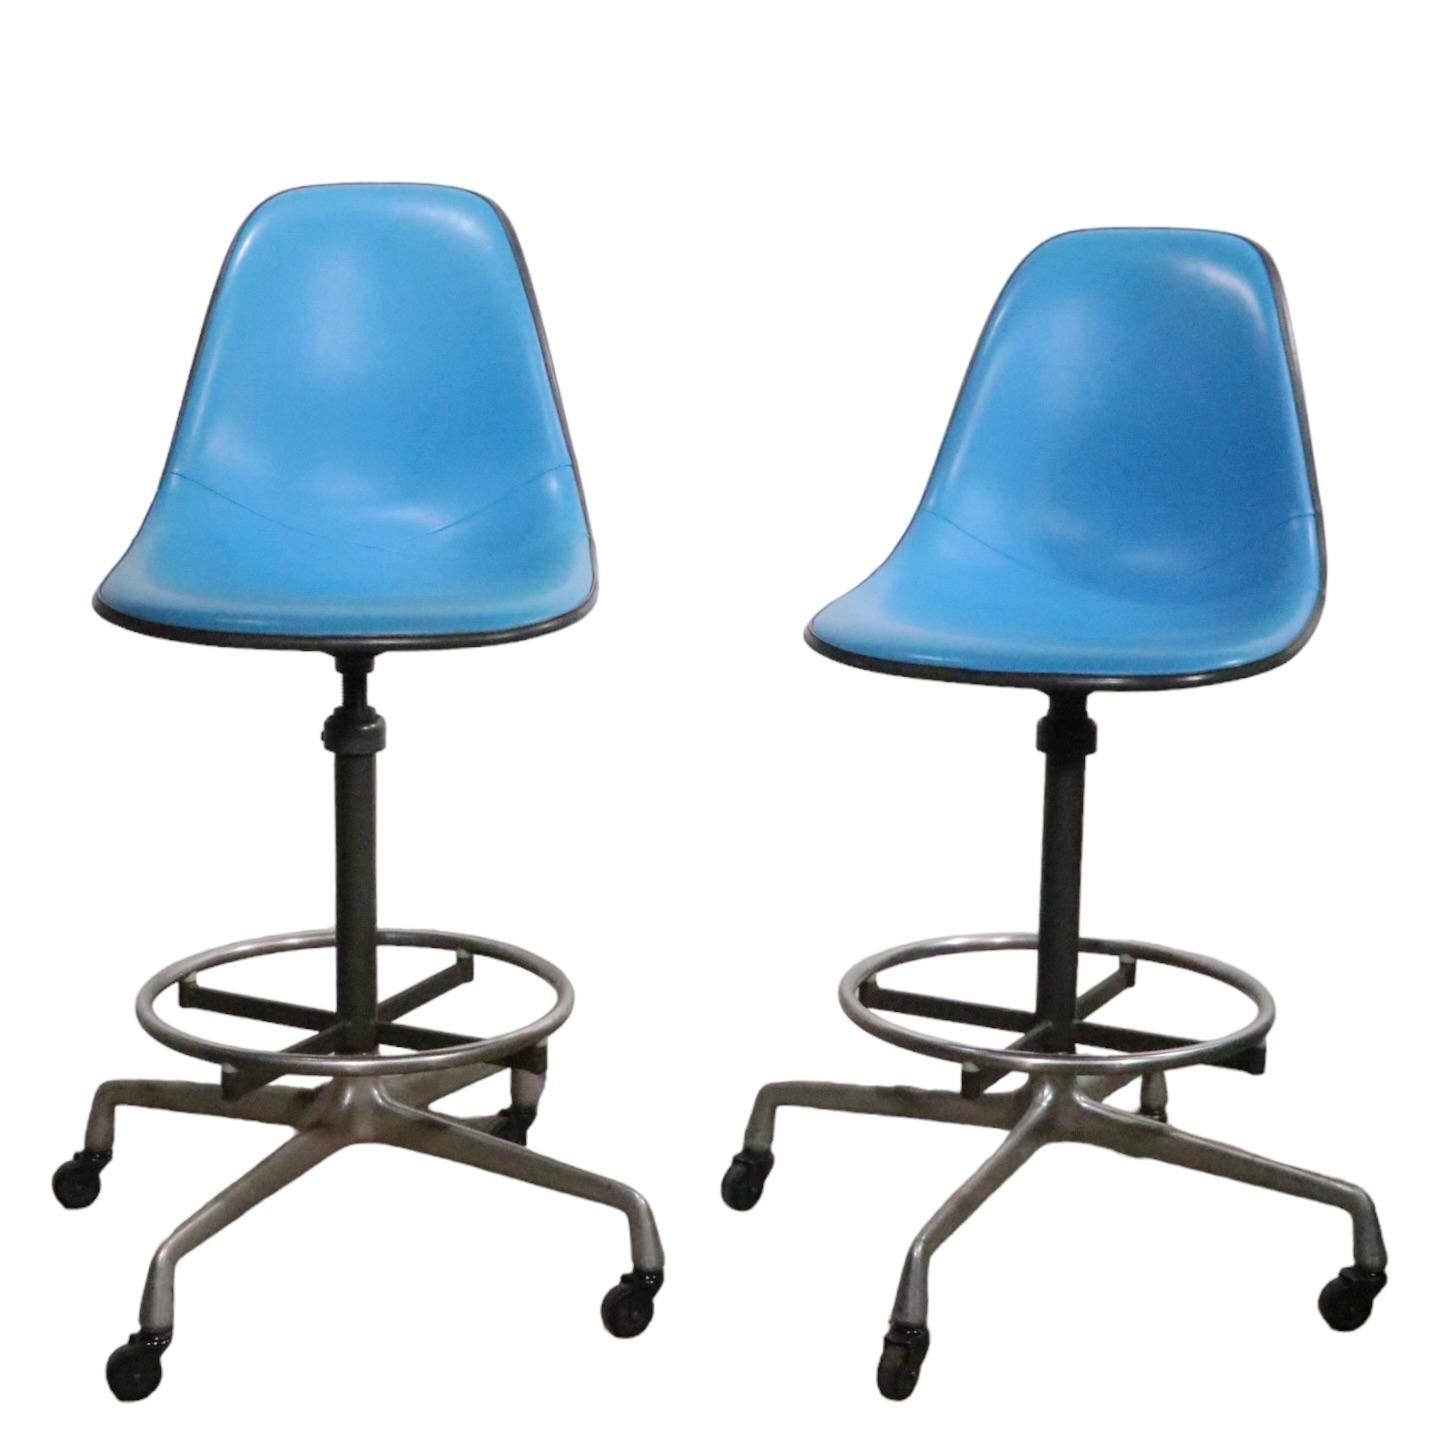 Pair of Eames designed drafting stools, manufactured by Herman Miller circa…
The stools feature vibrant blue vinyl seats, light gray fiberglass shells, gray steel vertical posts, and the classic aluminum universal style base, with original wheel